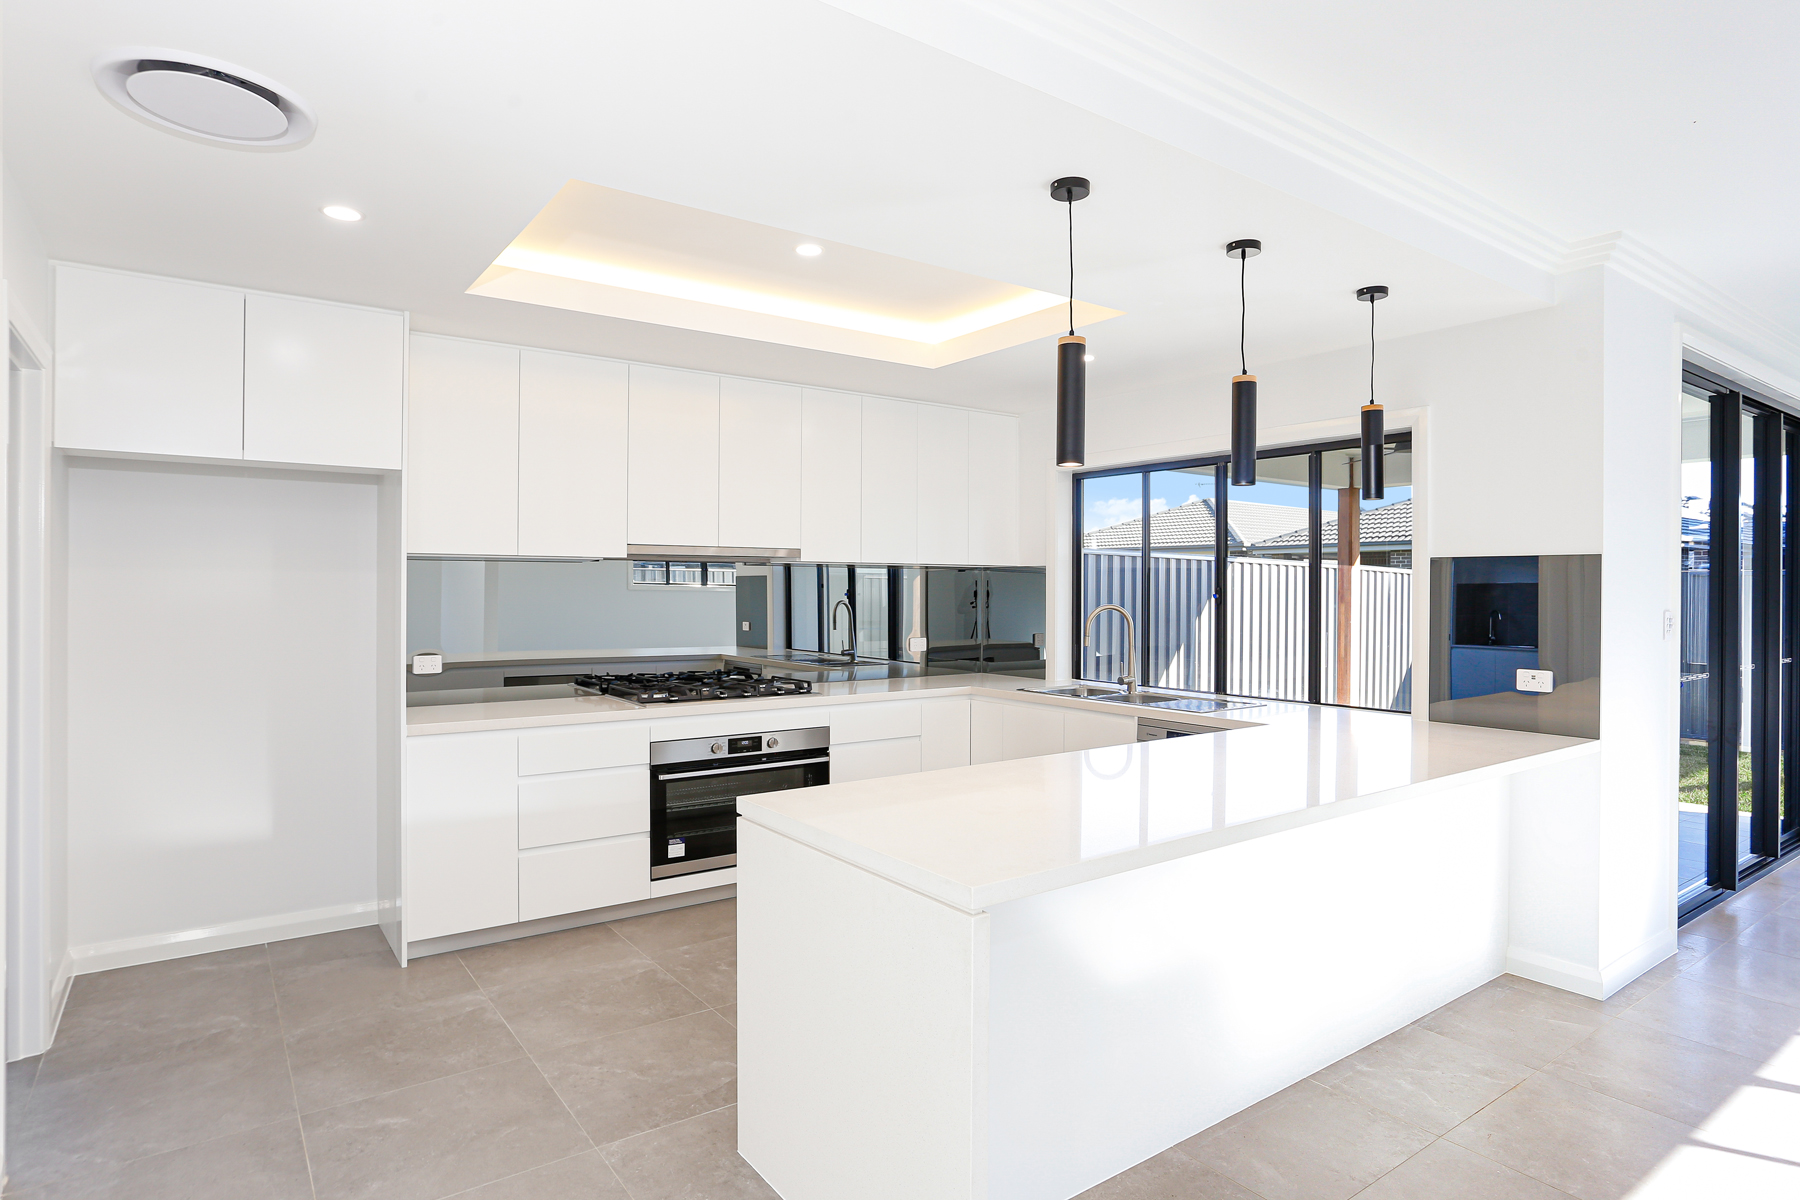 A White Kitchen With A Large Island In The Middle Of The Room